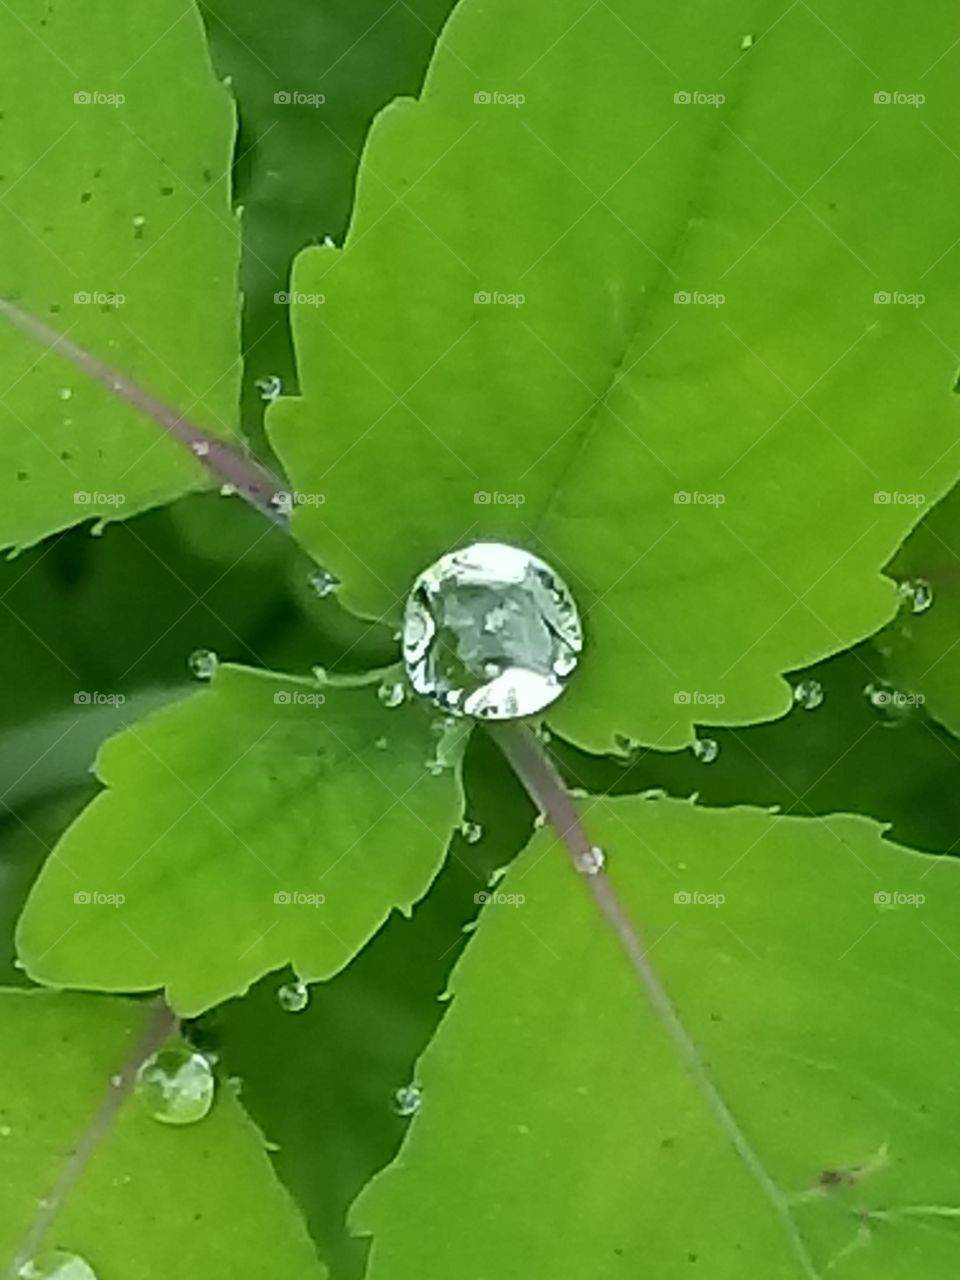 Mother Nature left this glimmering diamond raindrop for all to see.